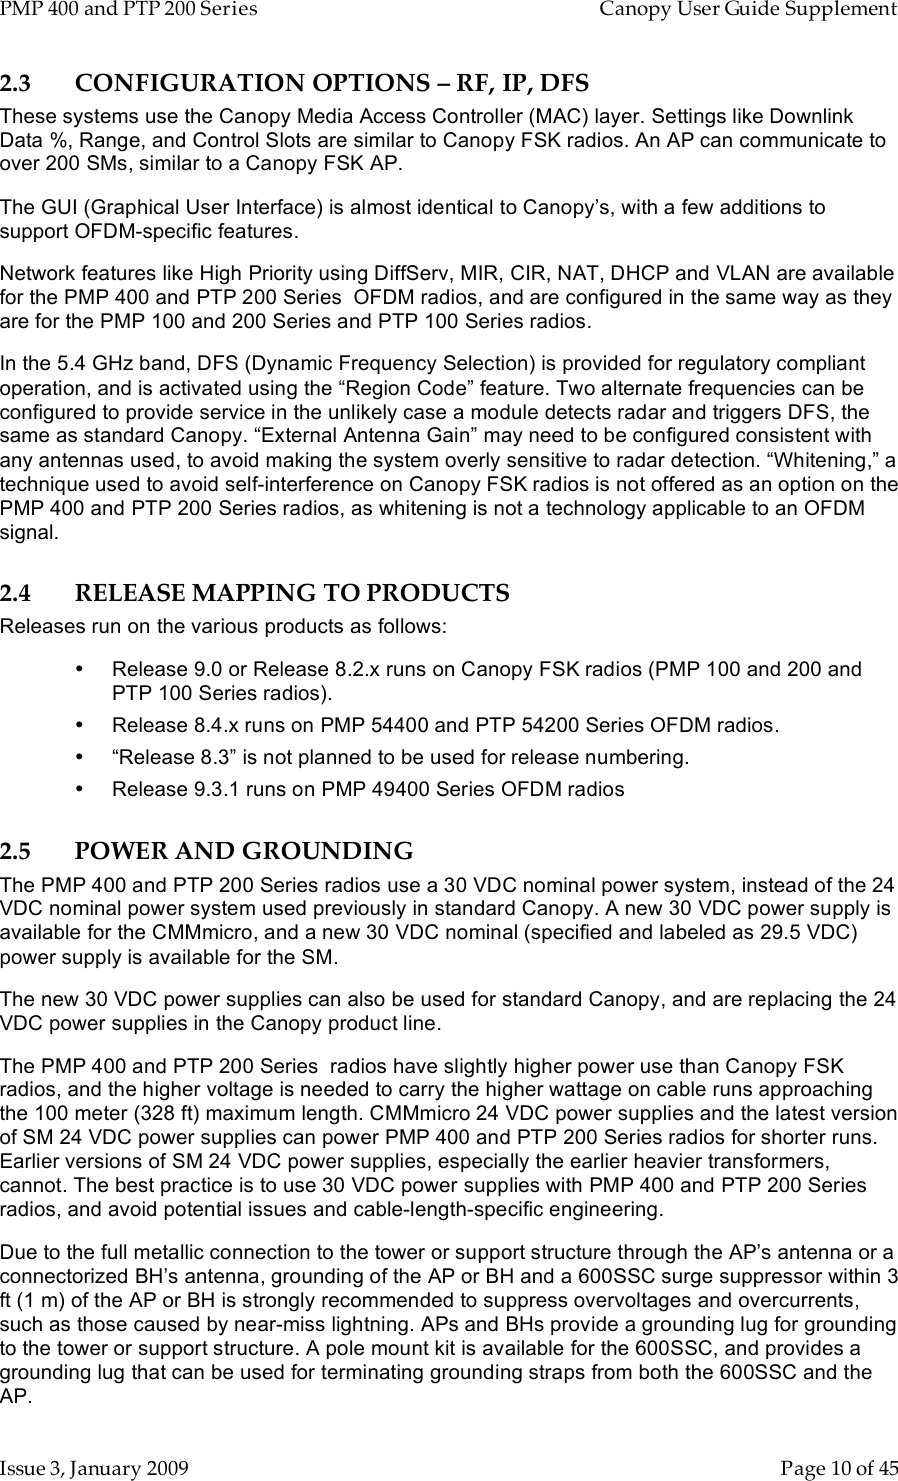 PMP 400 and PTP 200 Series   Canopy User Guide Supplement Issue 3, January 2009    Page 10 of 45 2.3 CONFIGURATION OPTIONS – RF, IP, DFS These systems use the Canopy Media Access Controller (MAC) layer. Settings like Downlink Data %, Range, and Control Slots are similar to Canopy FSK radios. An AP can communicate to over 200 SMs, similar to a Canopy FSK AP. The GUI (Graphical User Interface) is almost identical to Canopy’s, with a few additions to support OFDM-specific features. Network features like High Priority using DiffServ, MIR, CIR, NAT, DHCP and VLAN are available for the PMP 400 and PTP 200 Series  OFDM radios, and are configured in the same way as they are for the PMP 100 and 200 Series and PTP 100 Series radios. In the 5.4 GHz band, DFS (Dynamic Frequency Selection) is provided for regulatory compliant operation, and is activated using the “Region Code” feature. Two alternate frequencies can be configured to provide service in the unlikely case a module detects radar and triggers DFS, the same as standard Canopy. “External Antenna Gain” may need to be configured consistent with any antennas used, to avoid making the system overly sensitive to radar detection. “Whitening,” a technique used to avoid self-interference on Canopy FSK radios is not offered as an option on the PMP 400 and PTP 200 Series radios, as whitening is not a technology applicable to an OFDM signal. 2.4 RELEASE MAPPING TO PRODUCTS Releases run on the various products as follows: •  Release 9.0 or Release 8.2.x runs on Canopy FSK radios (PMP 100 and 200 and PTP 100 Series radios). •  Release 8.4.x runs on PMP 54400 and PTP 54200 Series OFDM radios. •  “Release 8.3” is not planned to be used for release numbering. •  Release 9.3.1 runs on PMP 49400 Series OFDM radios 2.5 POWER AND GROUNDING The PMP 400 and PTP 200 Series radios use a 30 VDC nominal power system, instead of the 24 VDC nominal power system used previously in standard Canopy. A new 30 VDC power supply is available for the CMMmicro, and a new 30 VDC nominal (specified and labeled as 29.5 VDC) power supply is available for the SM. The new 30 VDC power supplies can also be used for standard Canopy, and are replacing the 24 VDC power supplies in the Canopy product line. The PMP 400 and PTP 200 Series  radios have slightly higher power use than Canopy FSK radios, and the higher voltage is needed to carry the higher wattage on cable runs approaching the 100 meter (328 ft) maximum length. CMMmicro 24 VDC power supplies and the latest version of SM 24 VDC power supplies can power PMP 400 and PTP 200 Series radios for shorter runs. Earlier versions of SM 24 VDC power supplies, especially the earlier heavier transformers, cannot. The best practice is to use 30 VDC power supplies with PMP 400 and PTP 200 Series radios, and avoid potential issues and cable-length-specific engineering. Due to the full metallic connection to the tower or support structure through the AP’s antenna or a connectorized BH’s antenna, grounding of the AP or BH and a 600SSC surge suppressor within 3 ft (1 m) of the AP or BH is strongly recommended to suppress overvoltages and overcurrents, such as those caused by near-miss lightning. APs and BHs provide a grounding lug for grounding to the tower or support structure. A pole mount kit is available for the 600SSC, and provides a grounding lug that can be used for terminating grounding straps from both the 600SSC and the AP. 